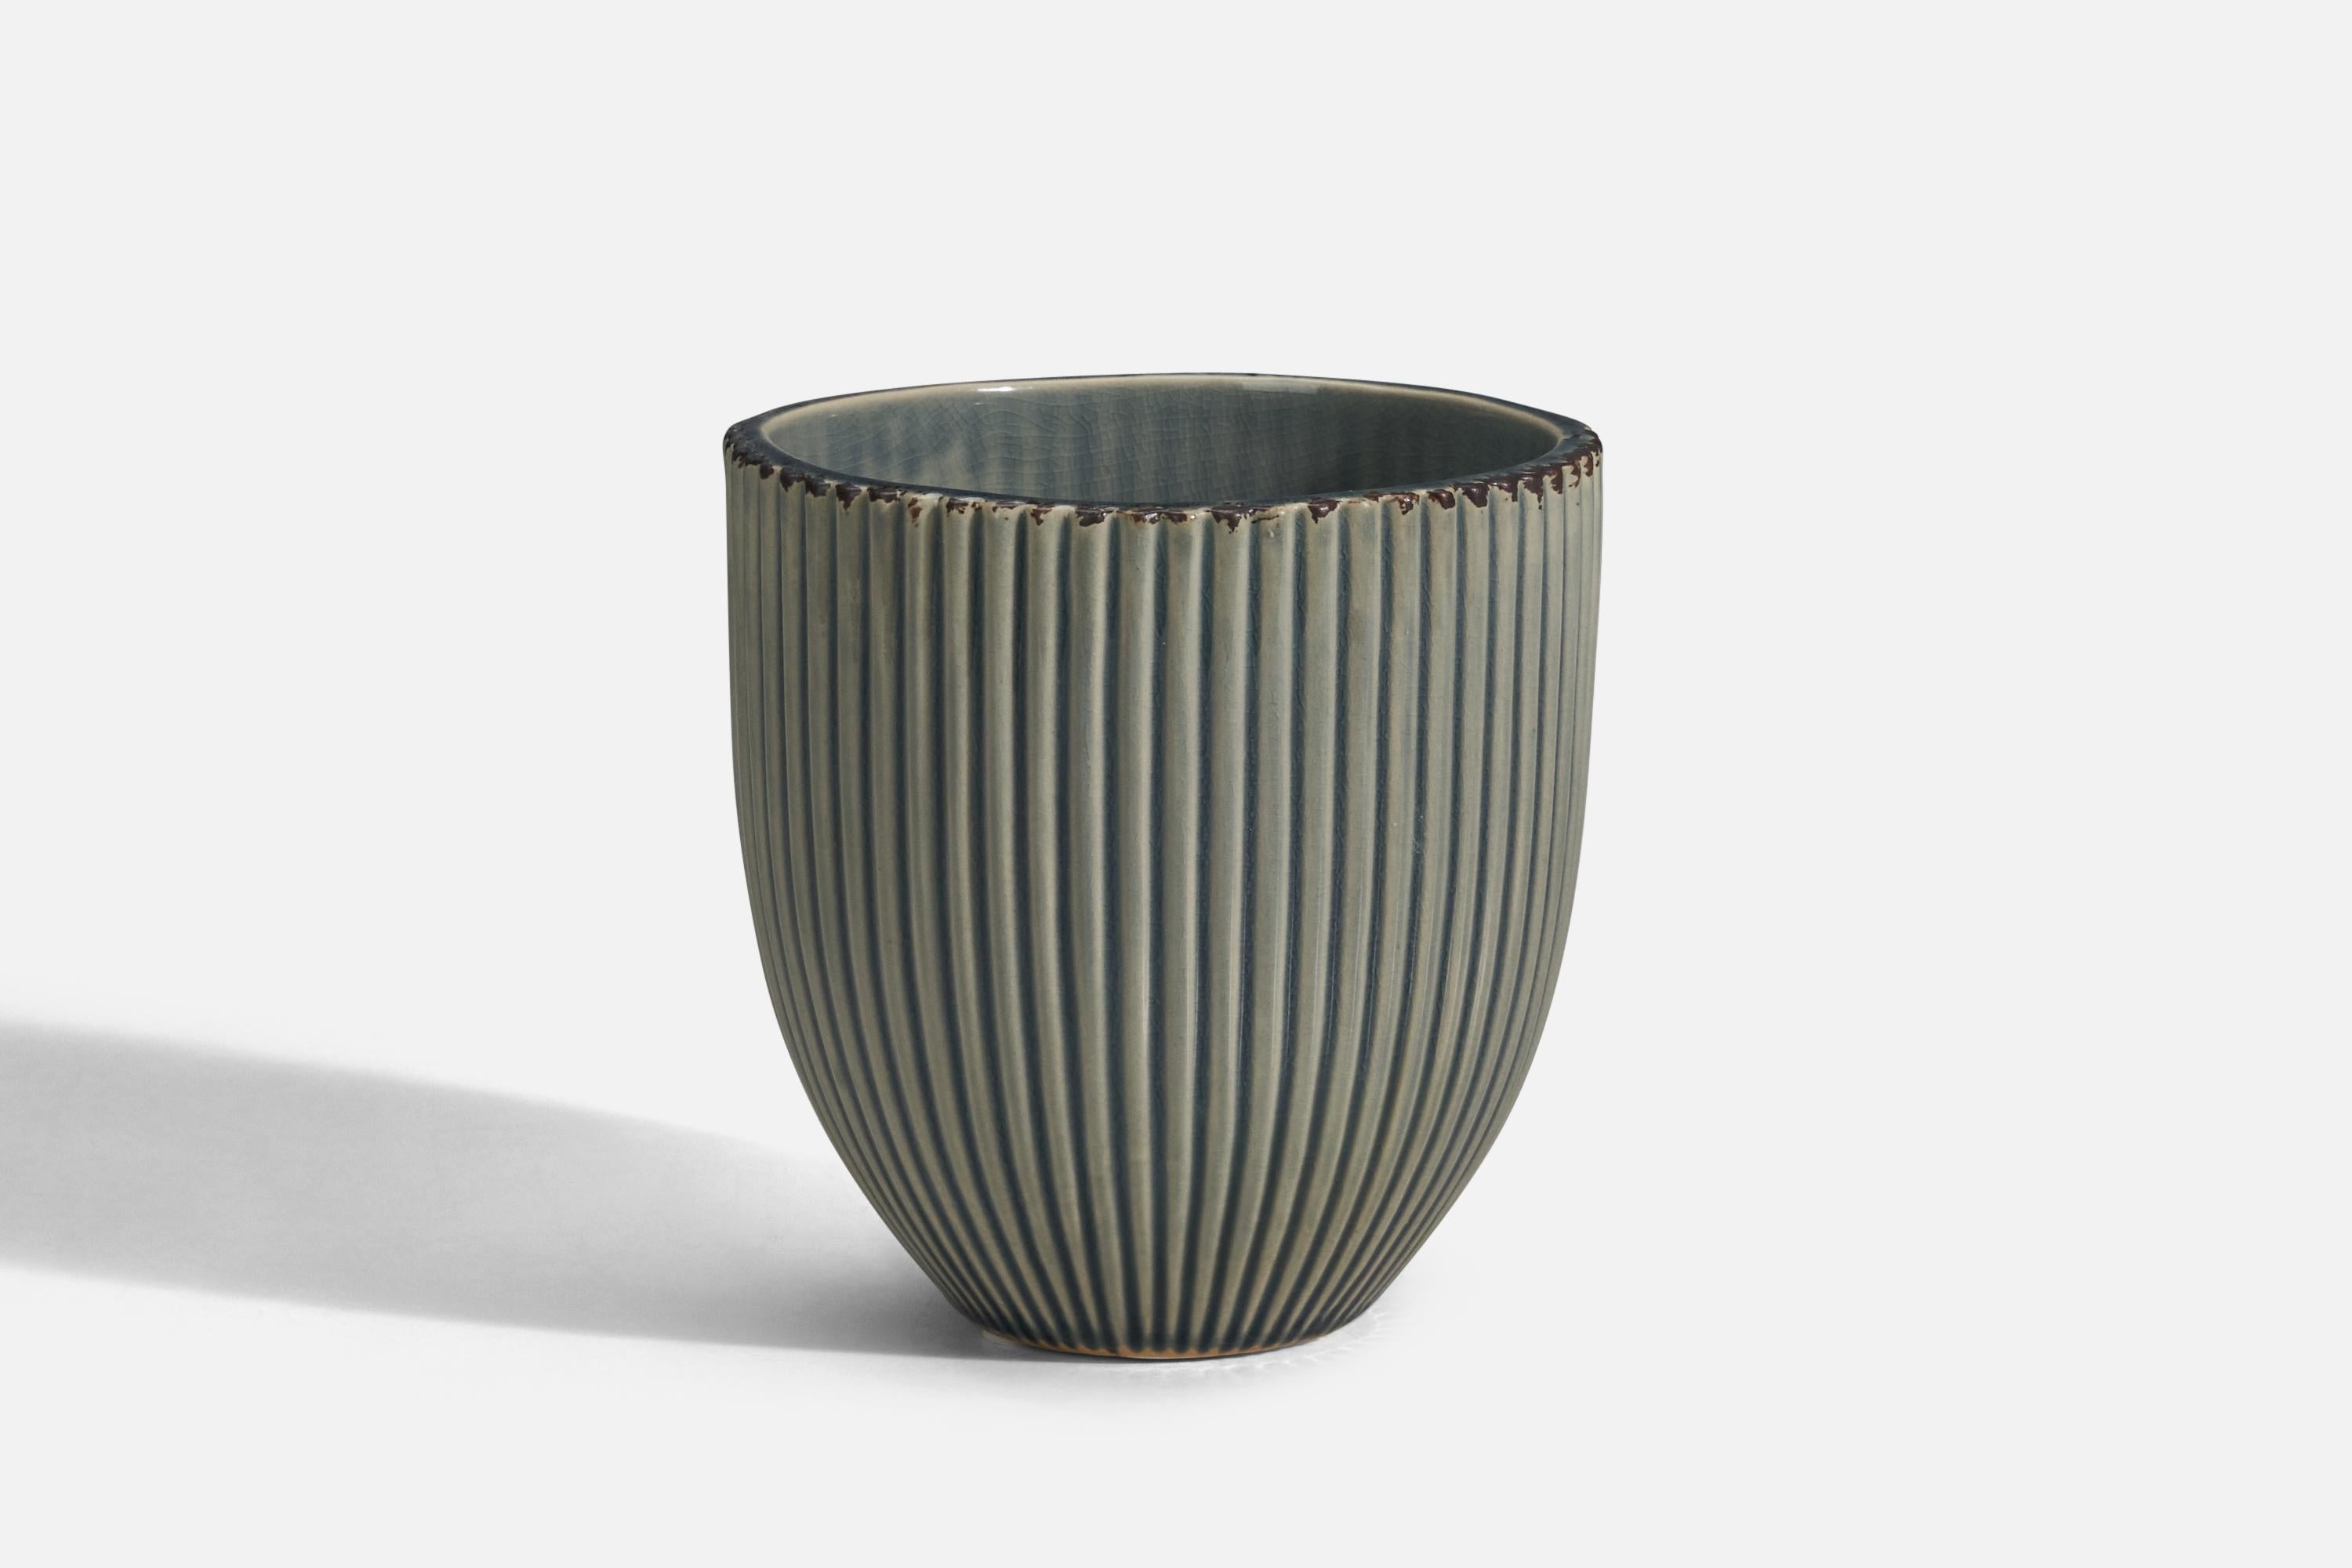 A grey glazed stoneware pot designed and produced in Denmark, 1940s.